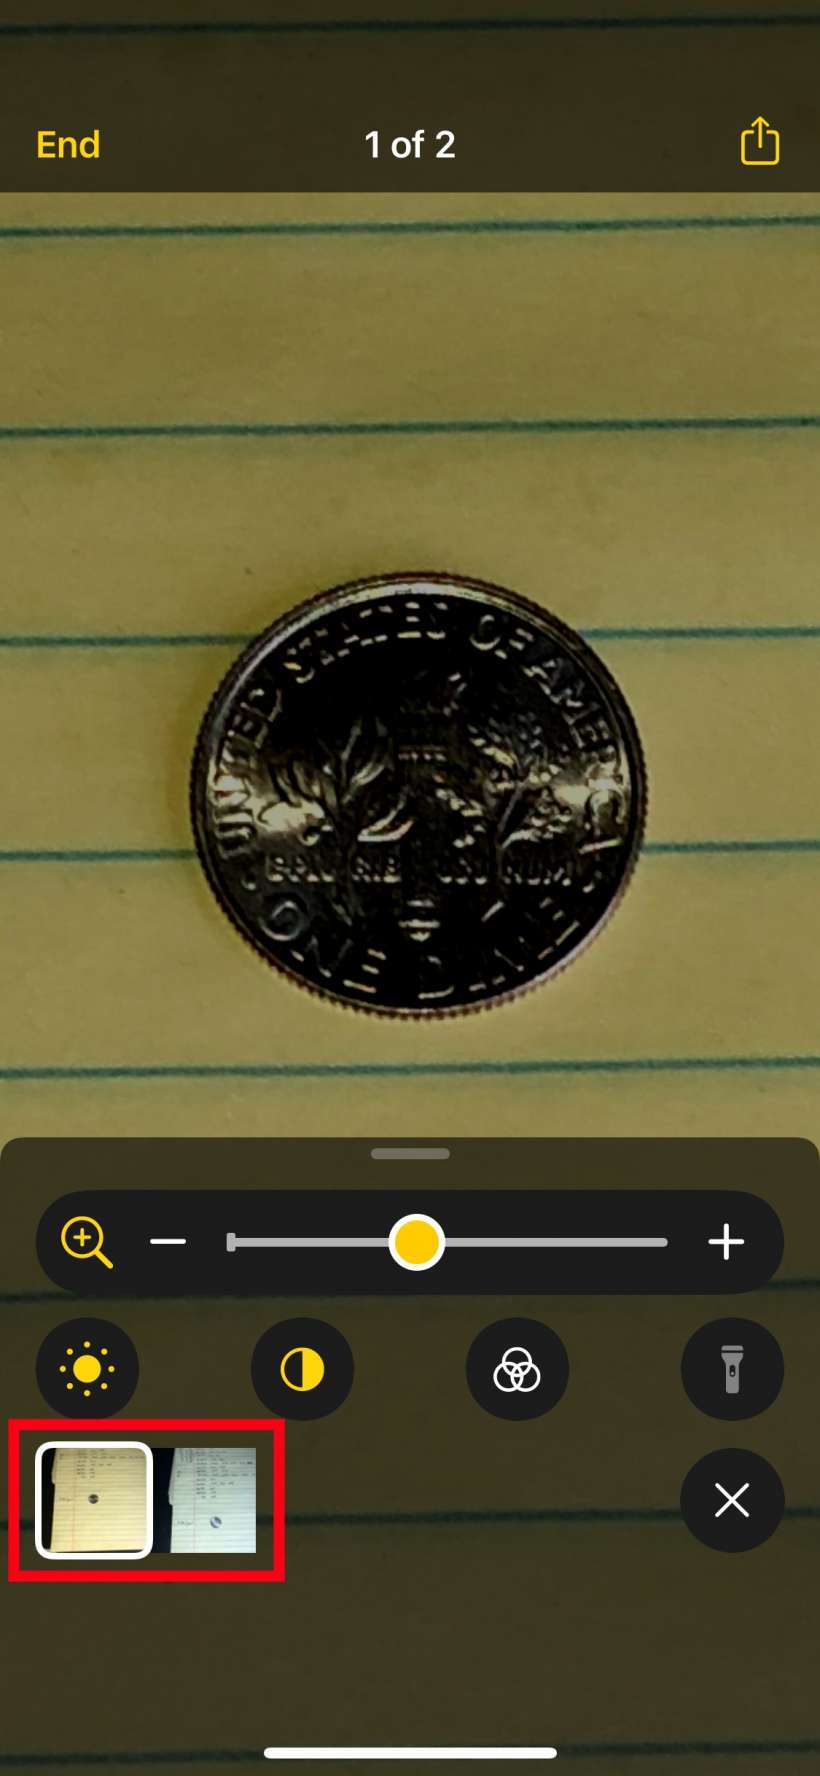 How to use the updated magnifier in iOS 14 on iPhone and iPad.